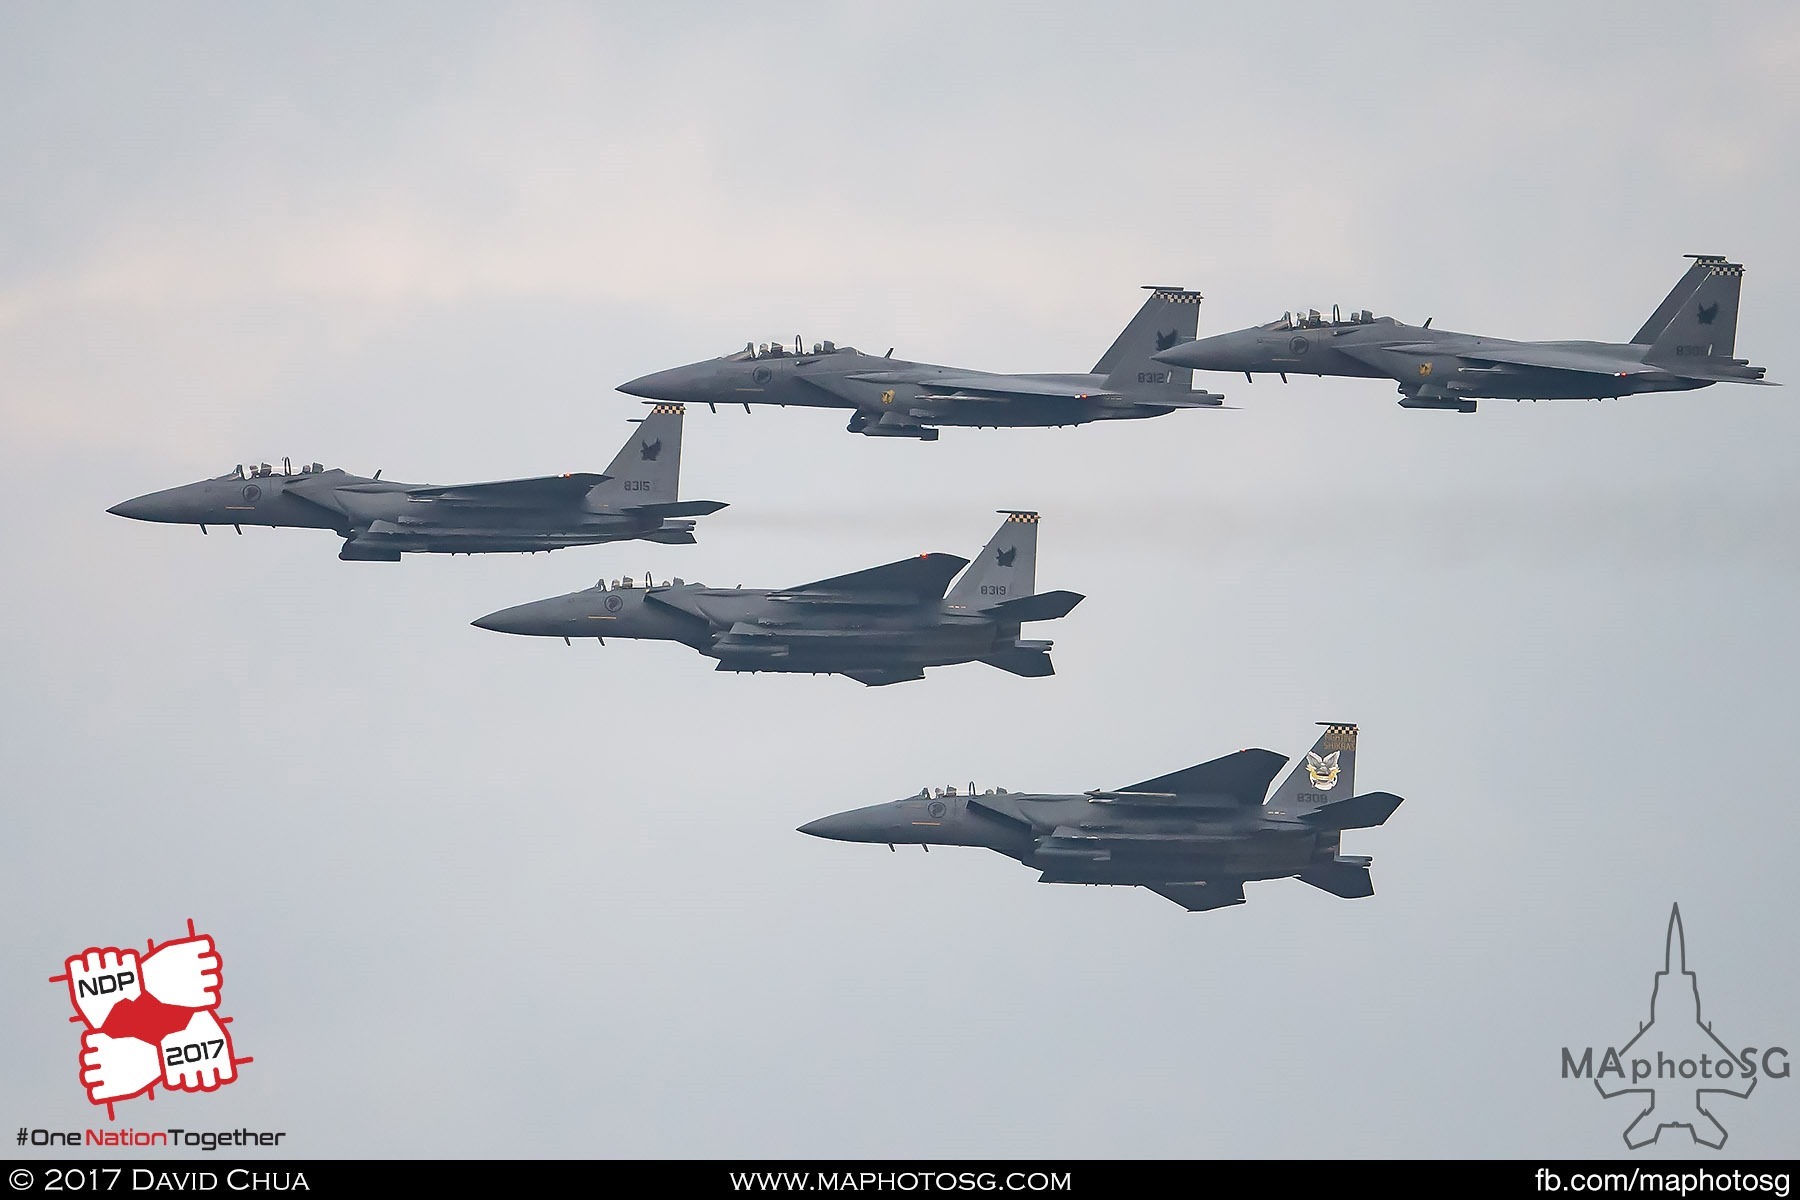 21. Five F-15SG Strike Eagles from 149 Squadron flies in formation to perform the Salute to the Nation bomb burst.